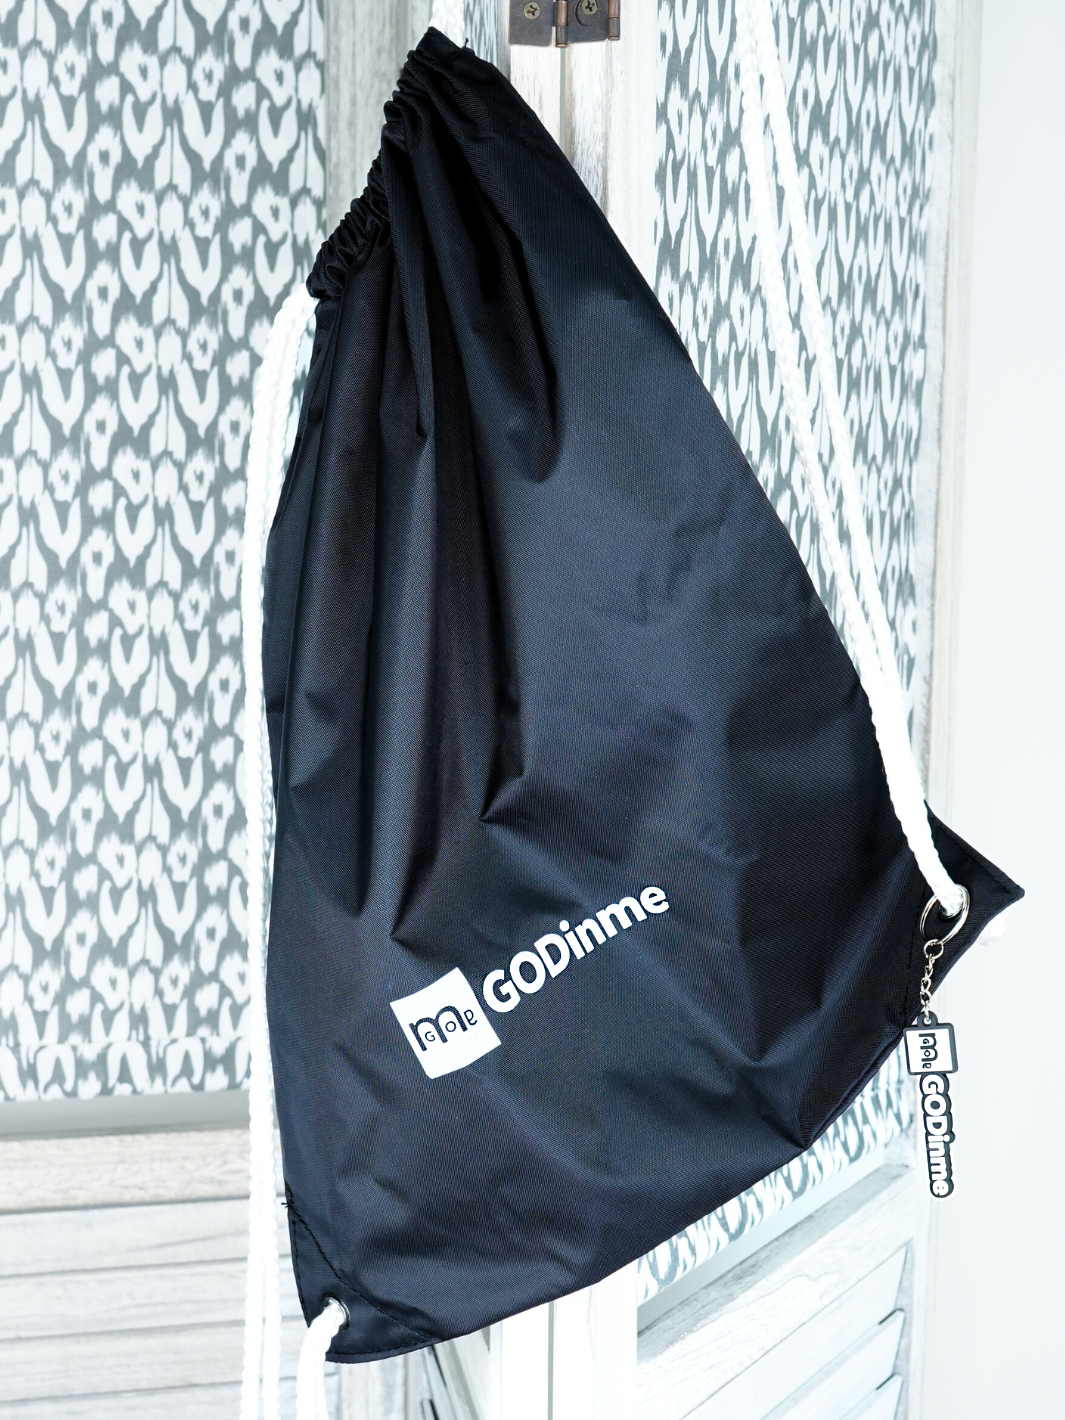 Soft yet durable Black nylon bag with thick White drawcord  and GODinme keychain attached. GODinme logo and name printed on front.